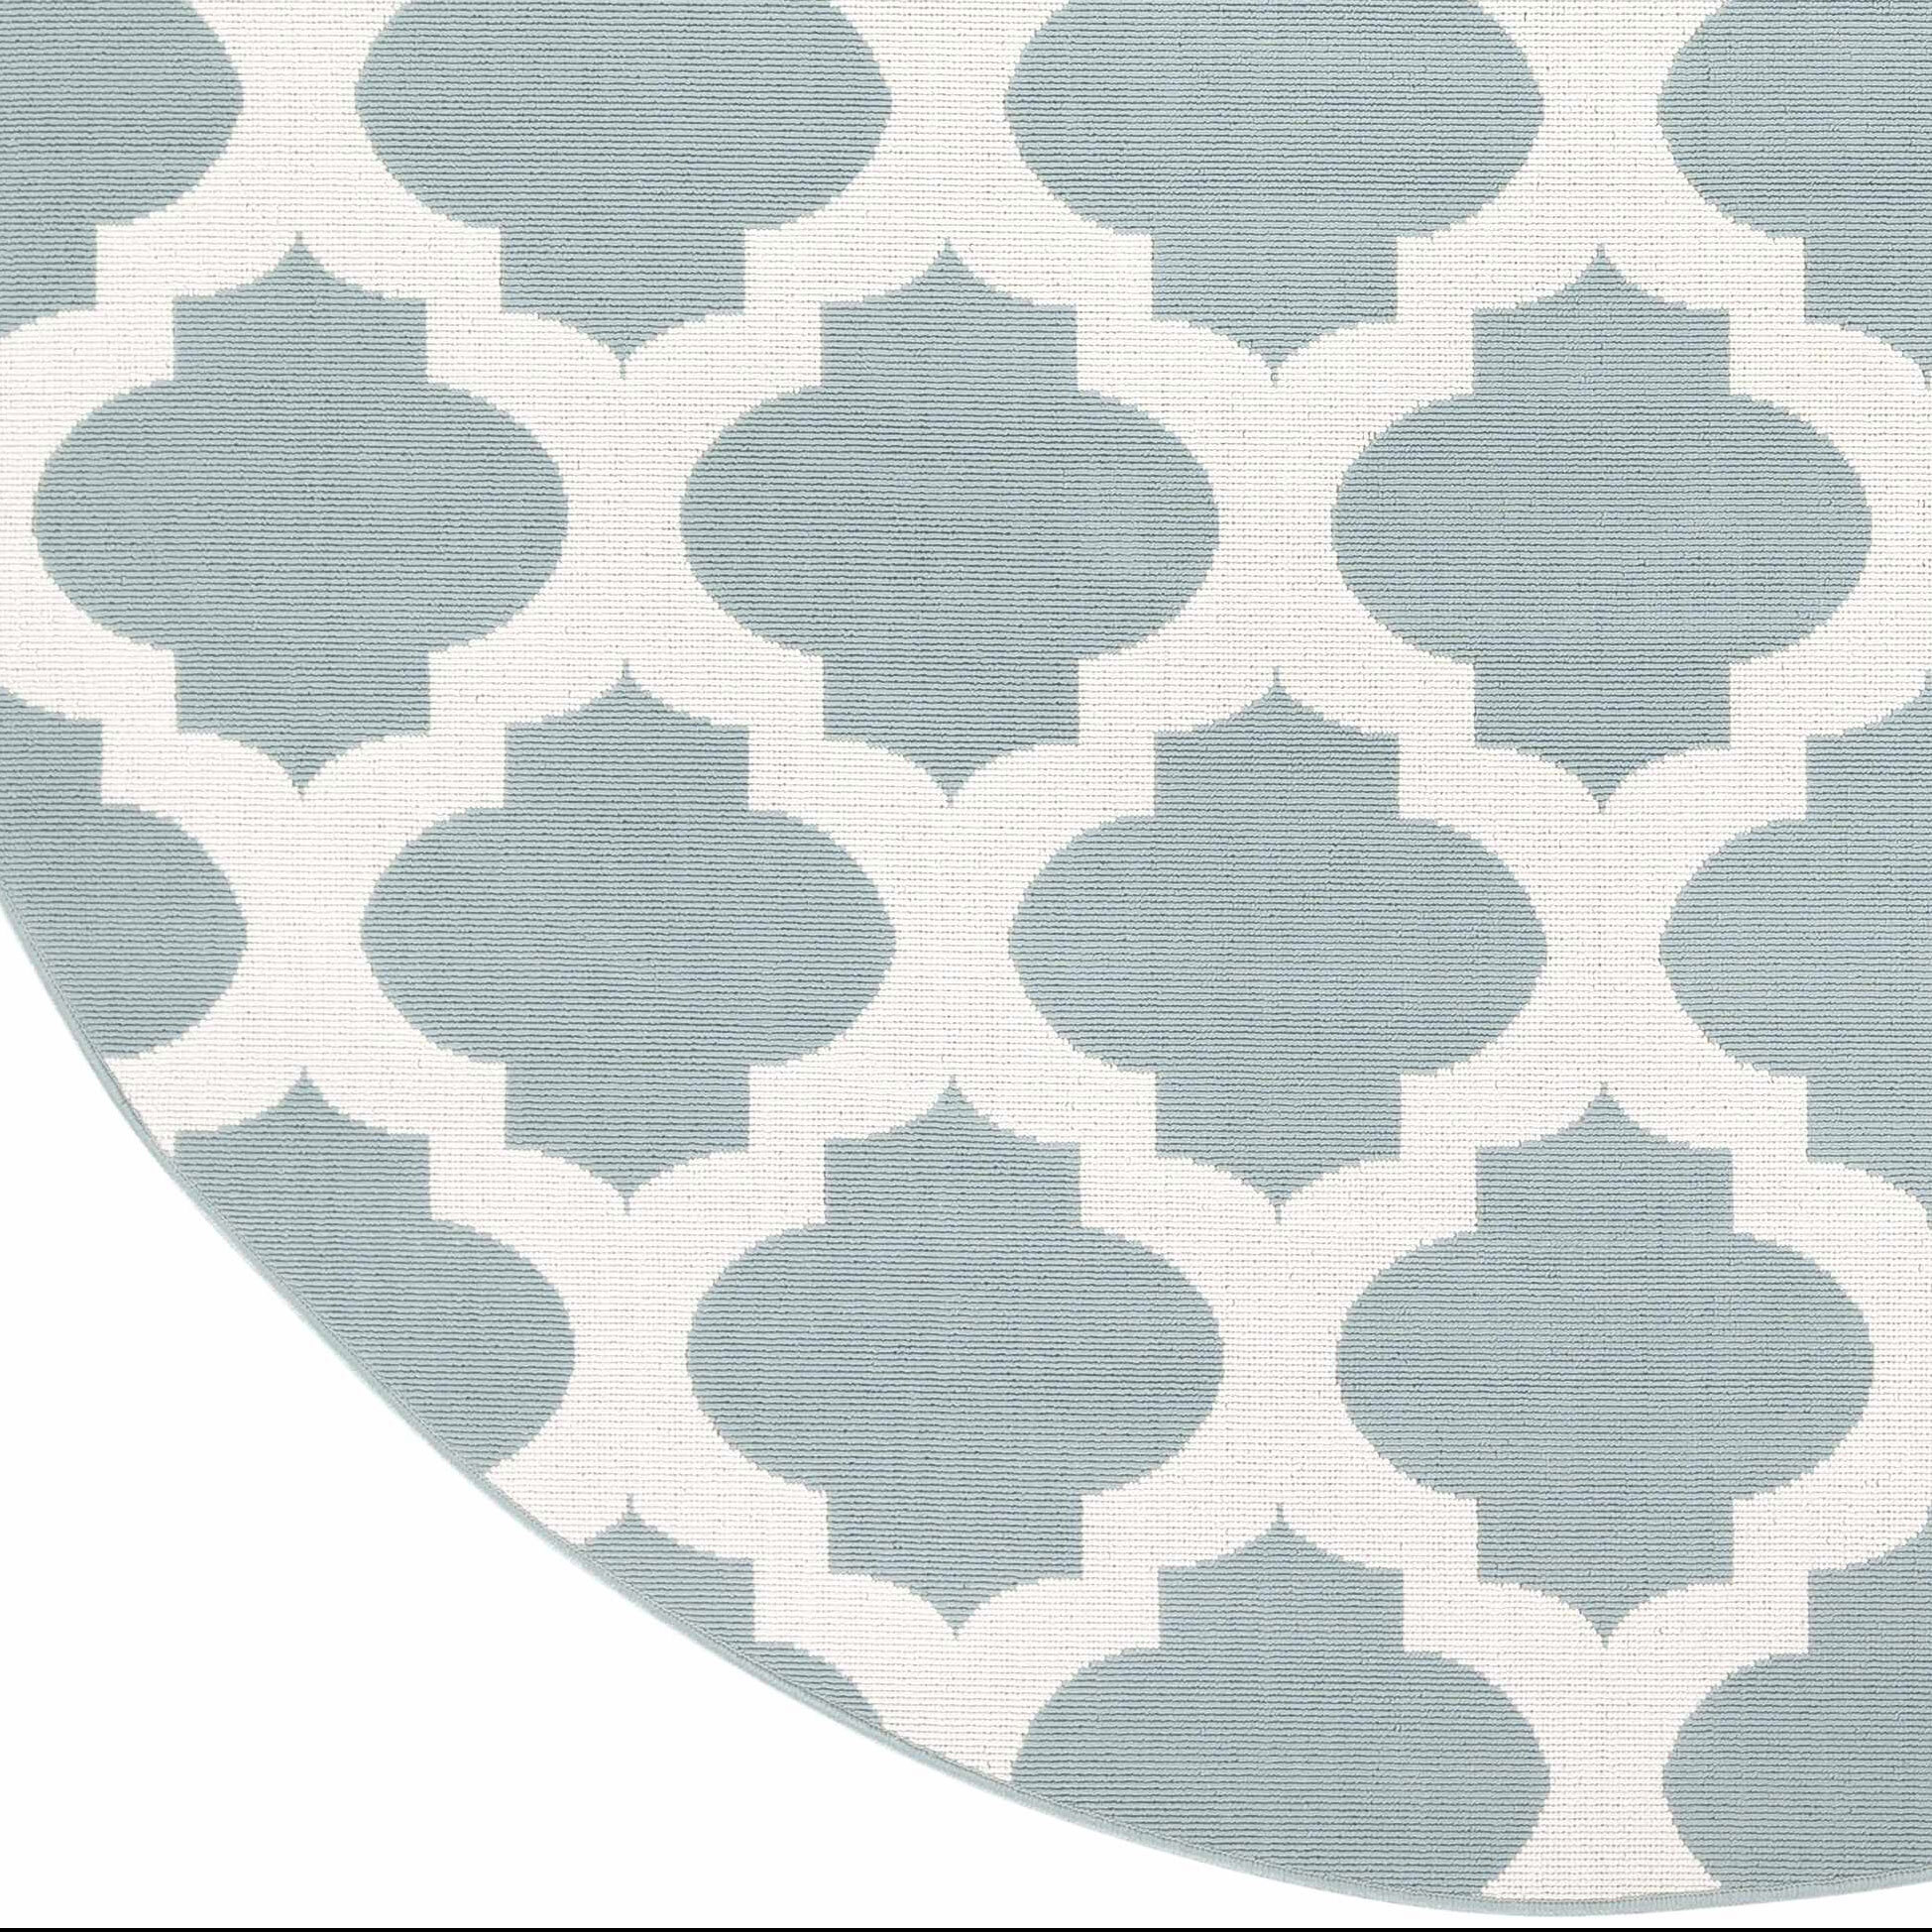 Ambient Round Rug AO5503-H